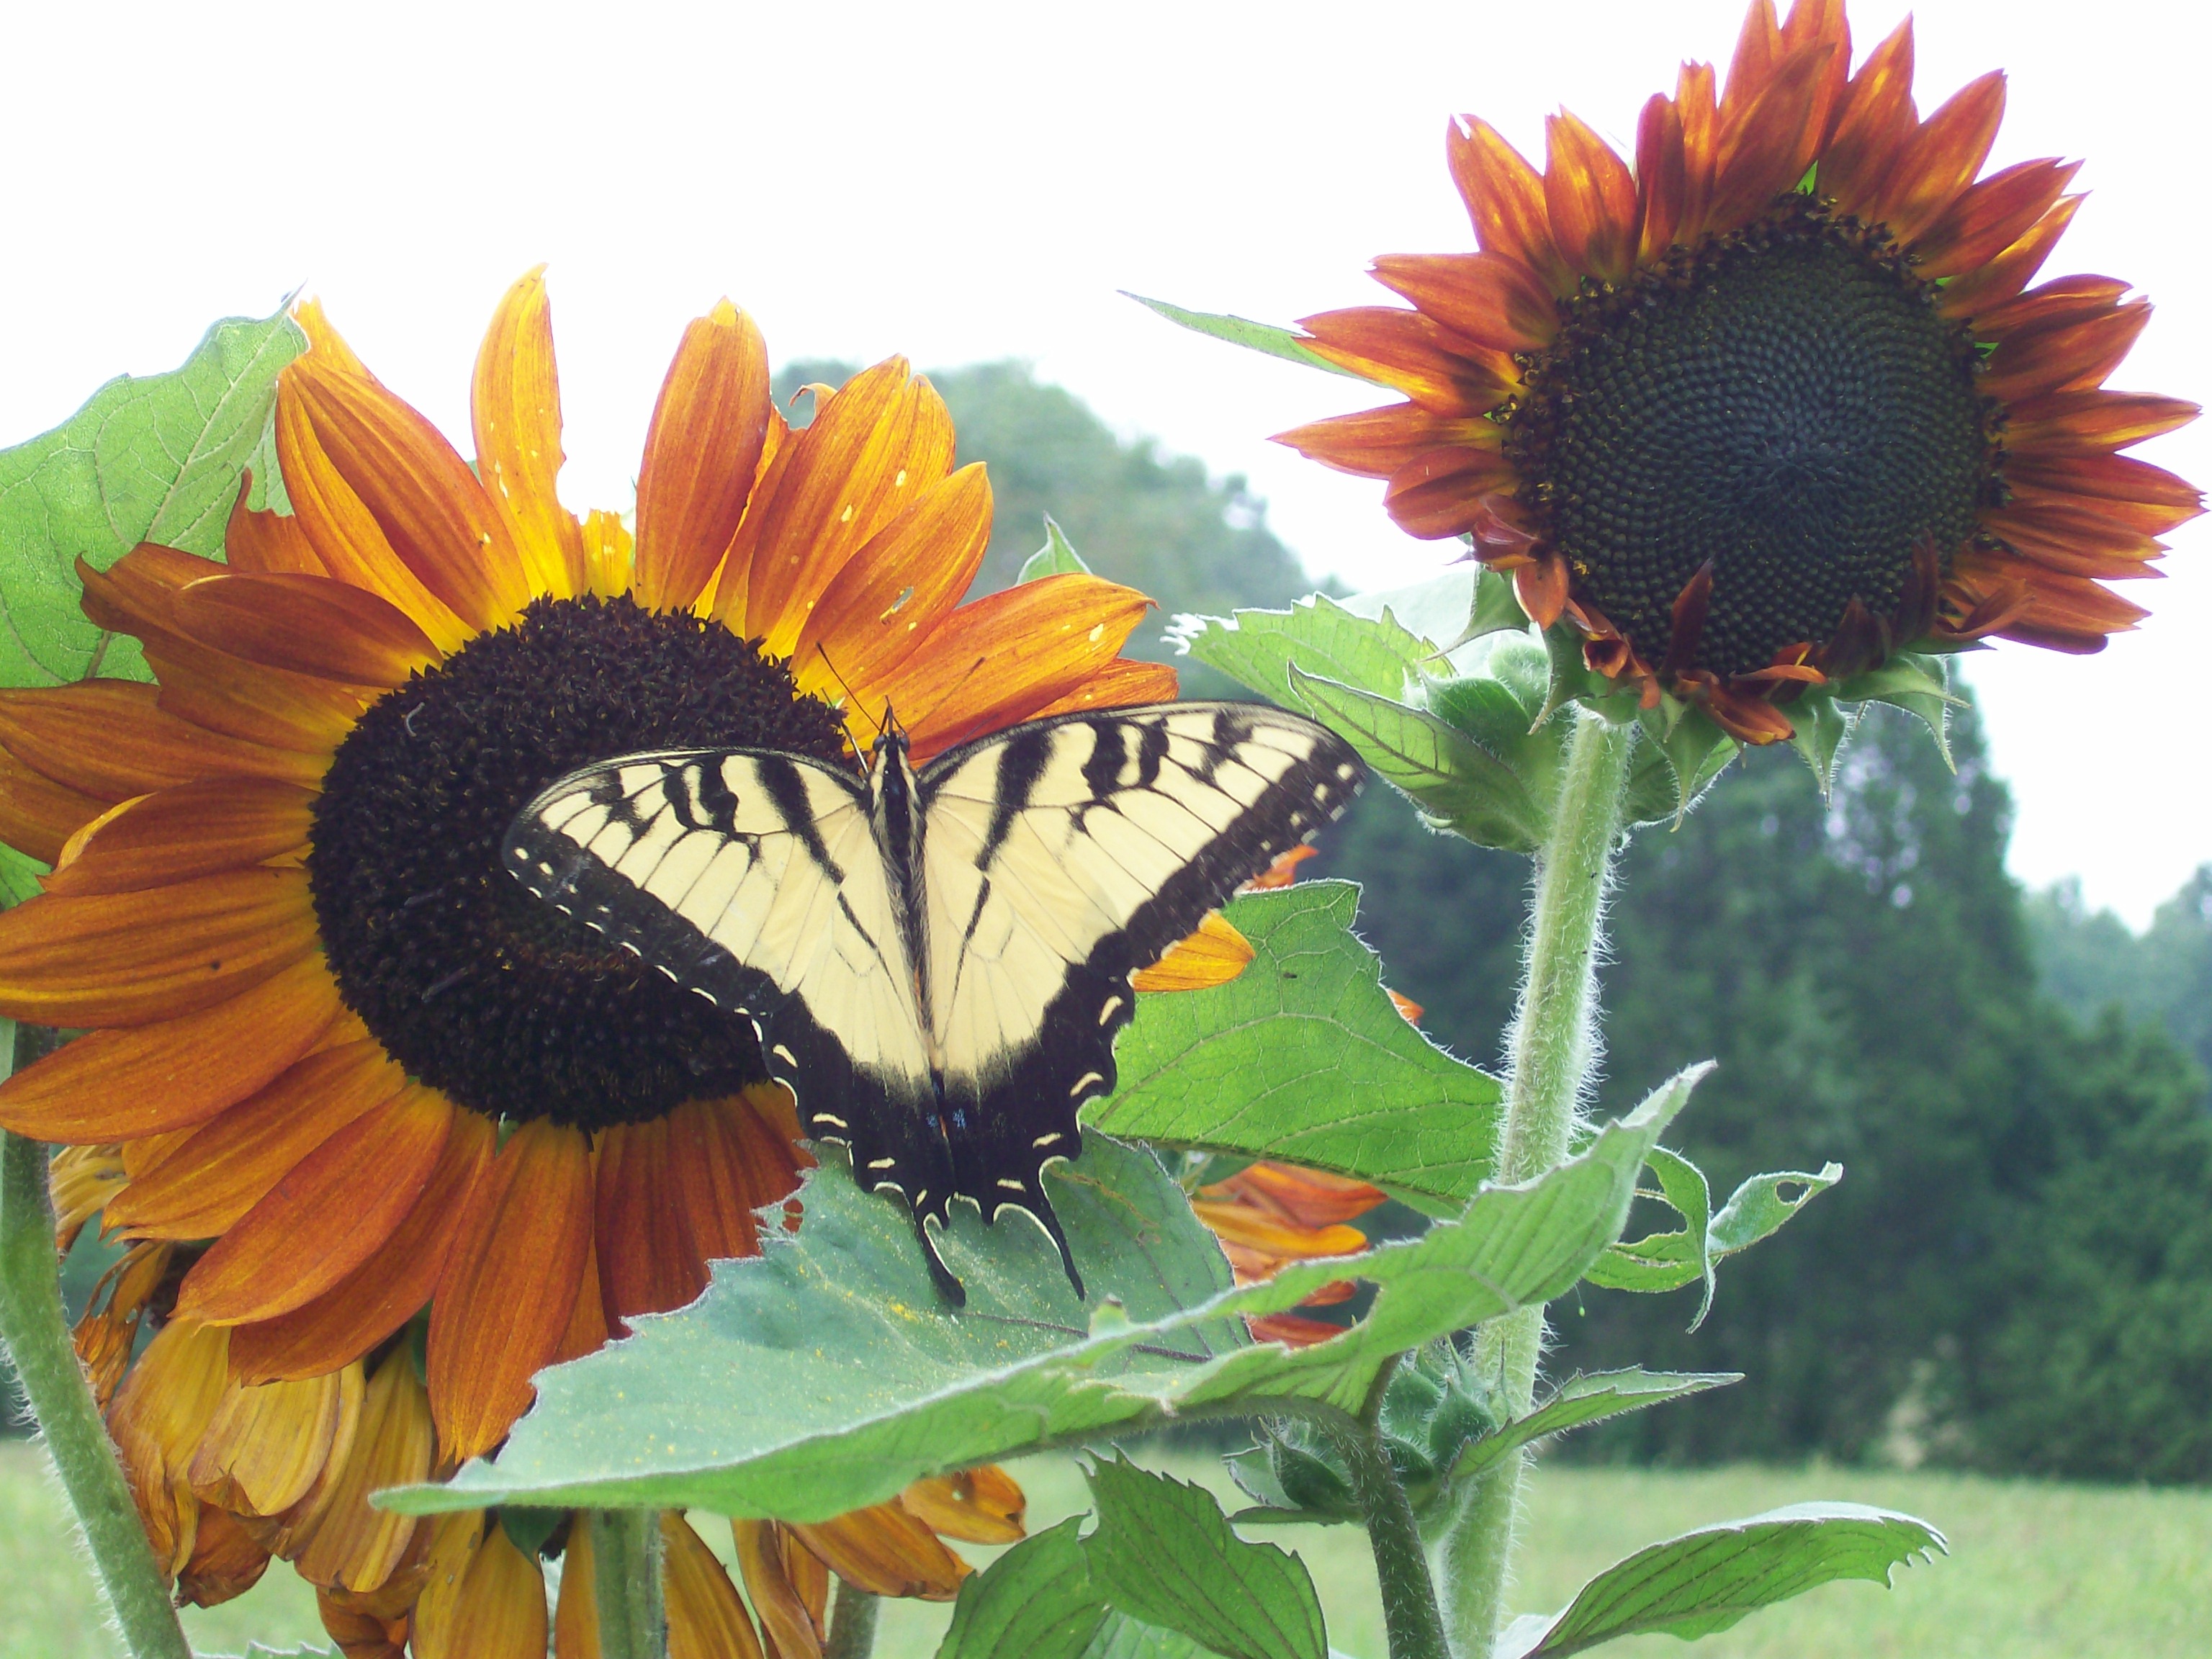 Grow Your Garden with Sunflowers and More from Southern Exposure in 2020!